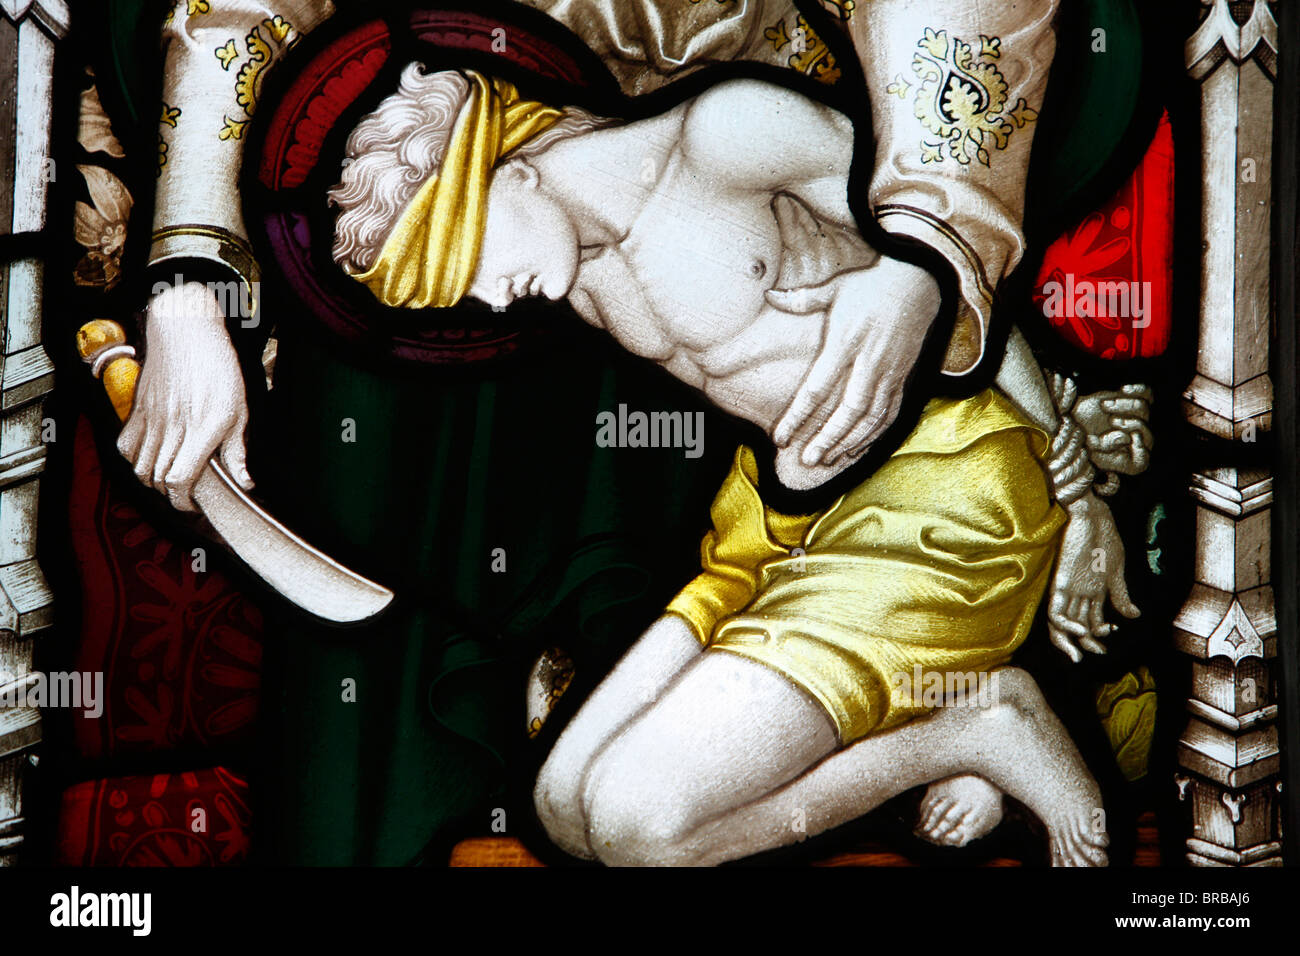 An angel appearing to Abraham and his son, 19th century stained glass in St. John's Anglican church, Sydney, Australia Stock Photo